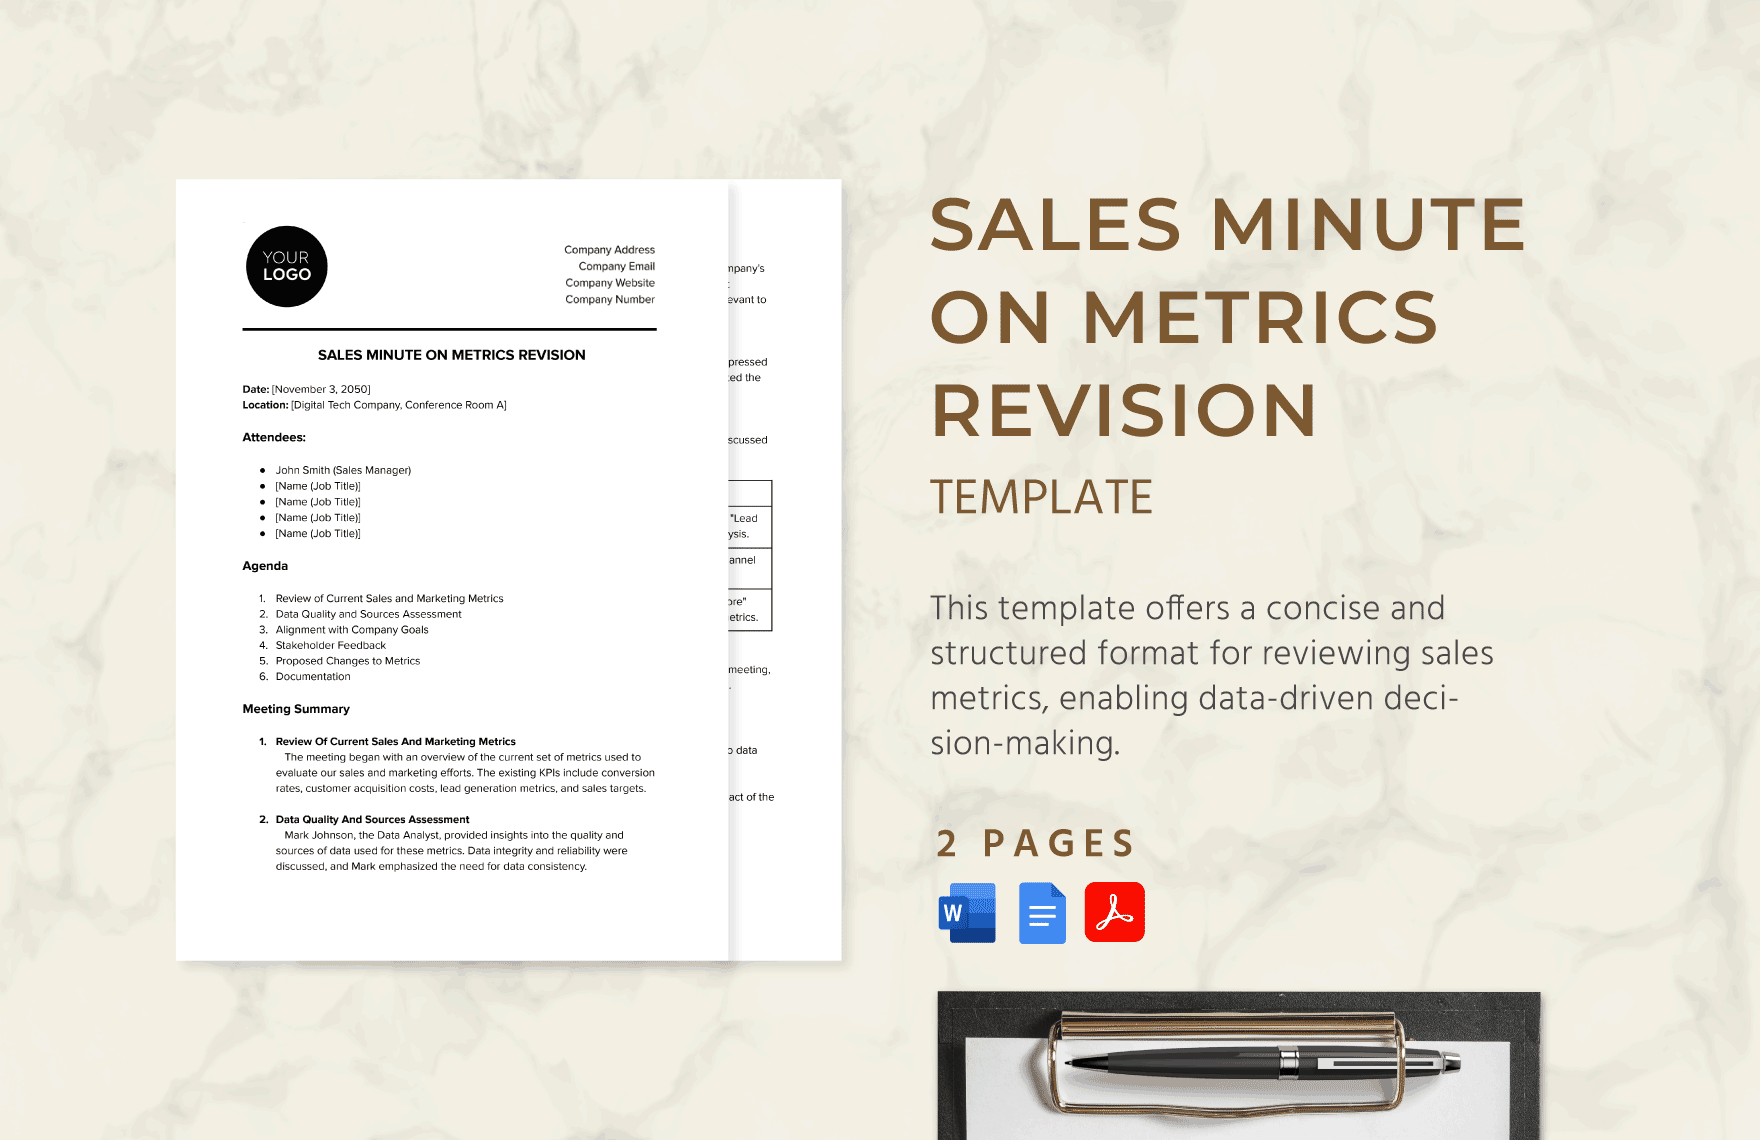 Sales Minute on Metrics Revision Template